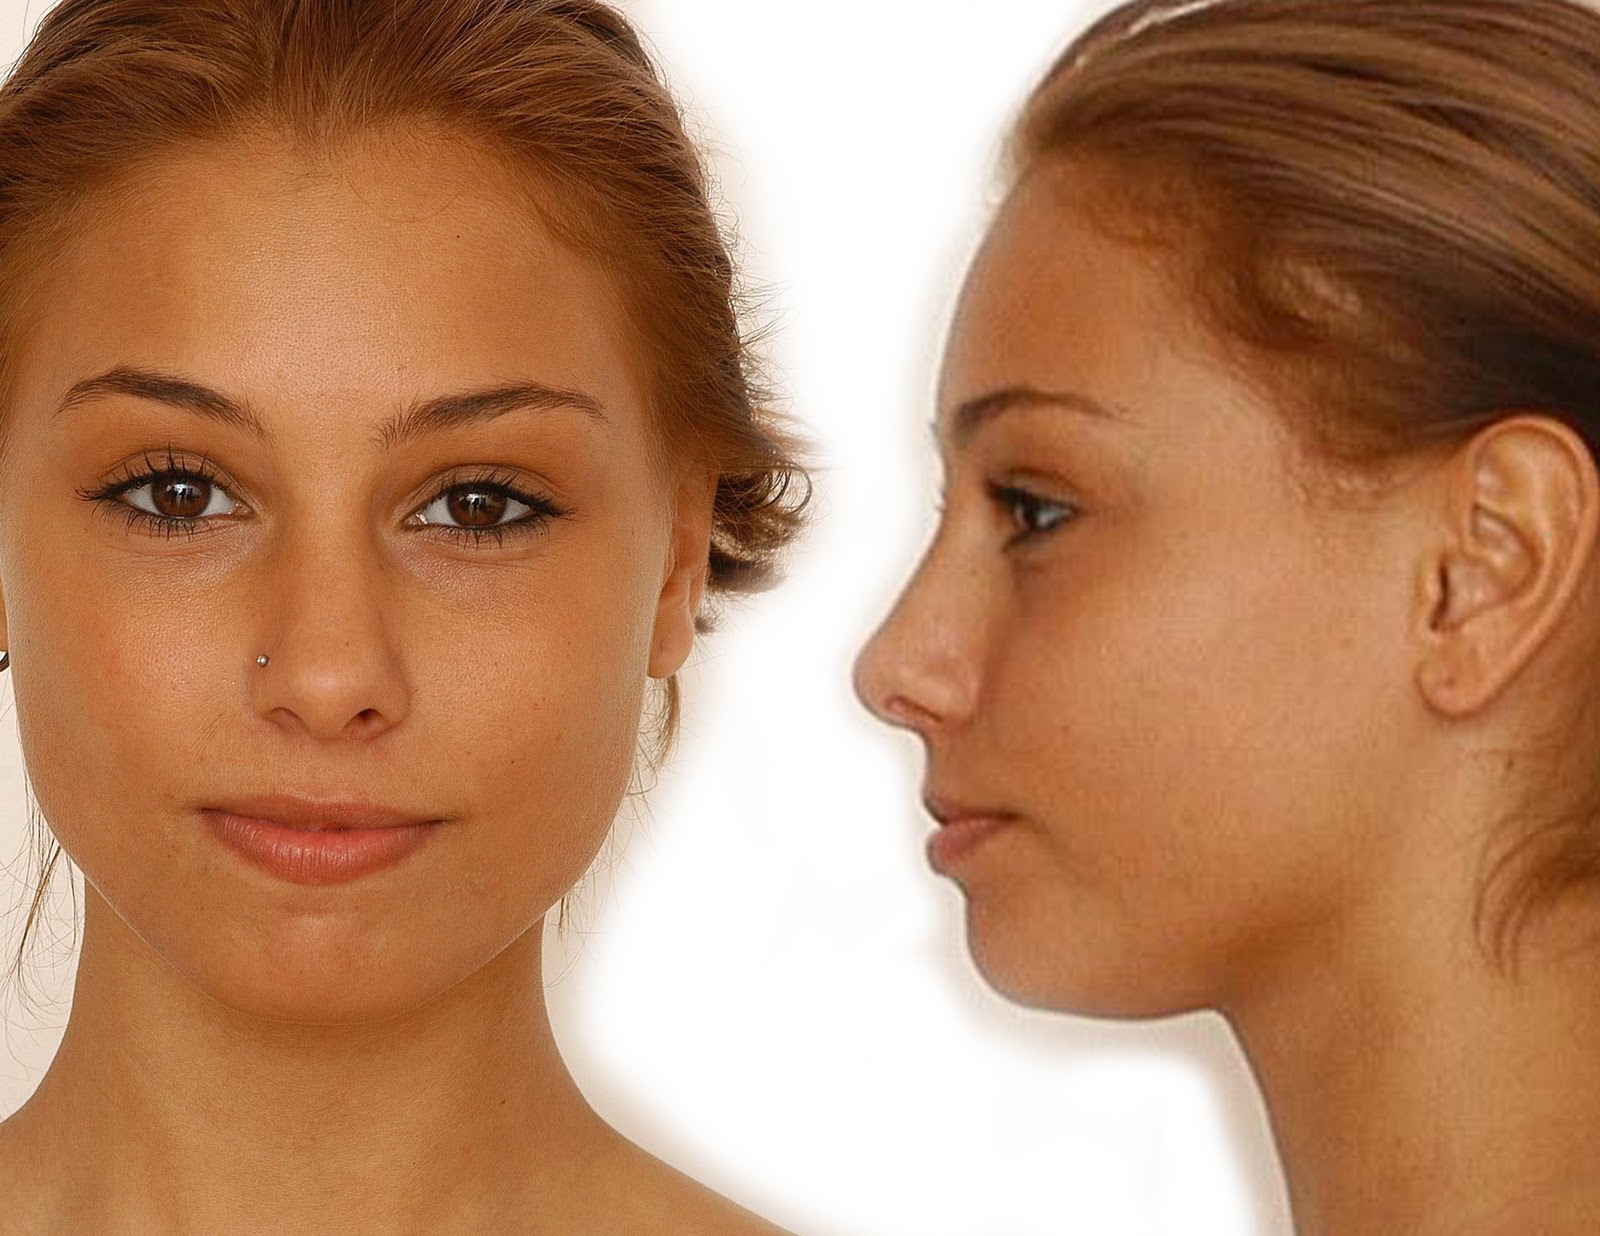 Female Face Front And Side View,Female Face Front And Side View Google Sear...